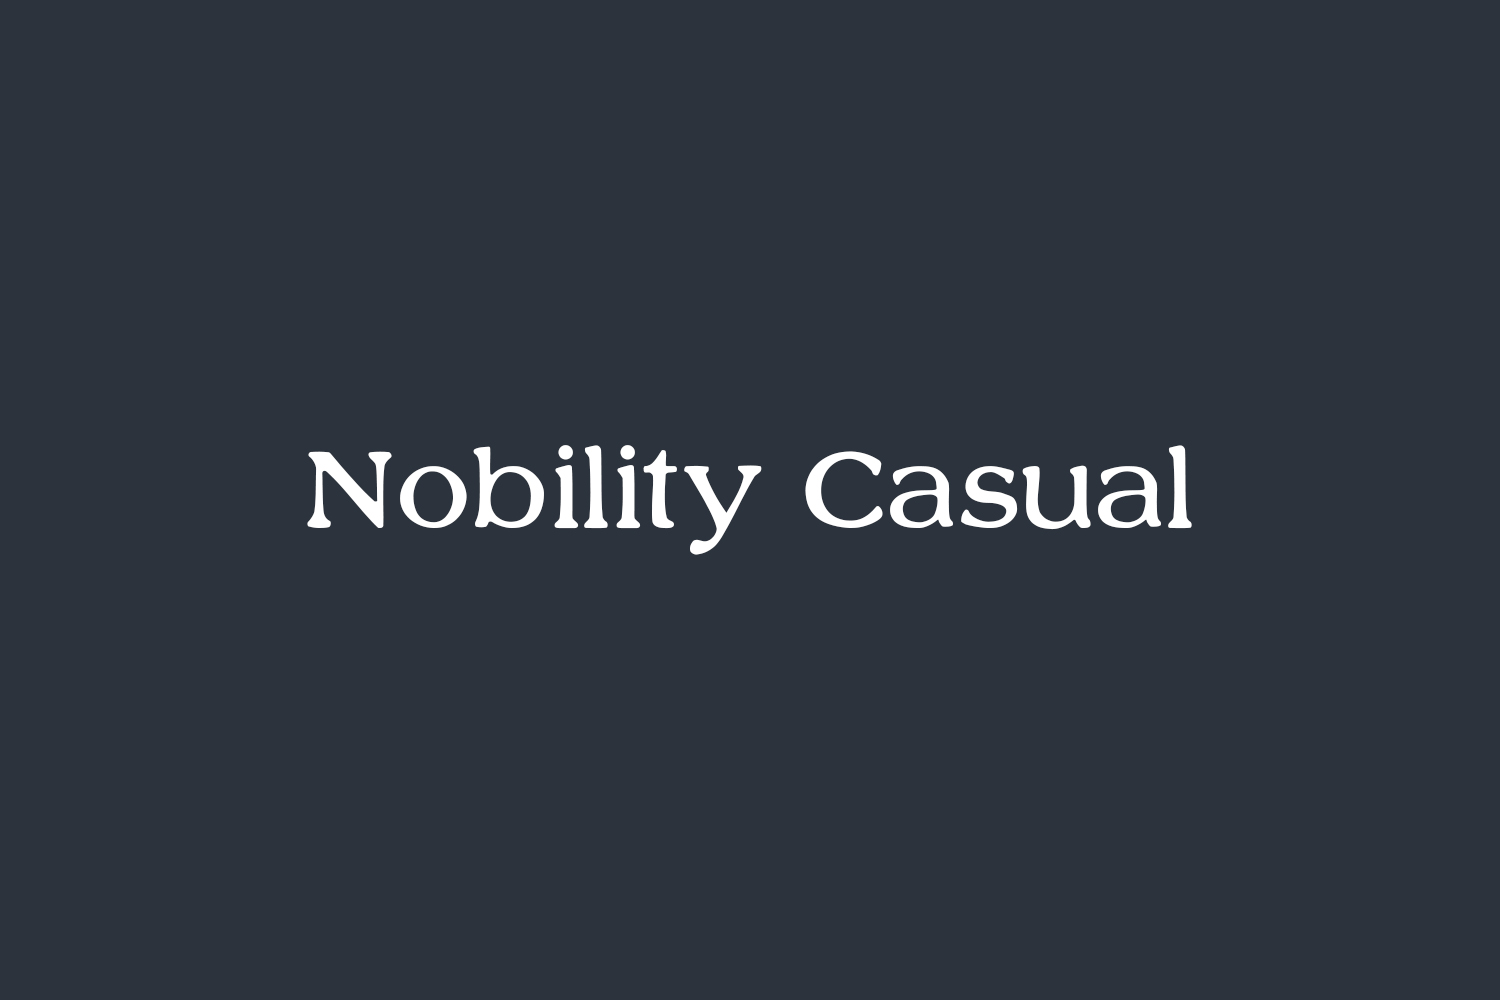 Nobility Casual Free Font